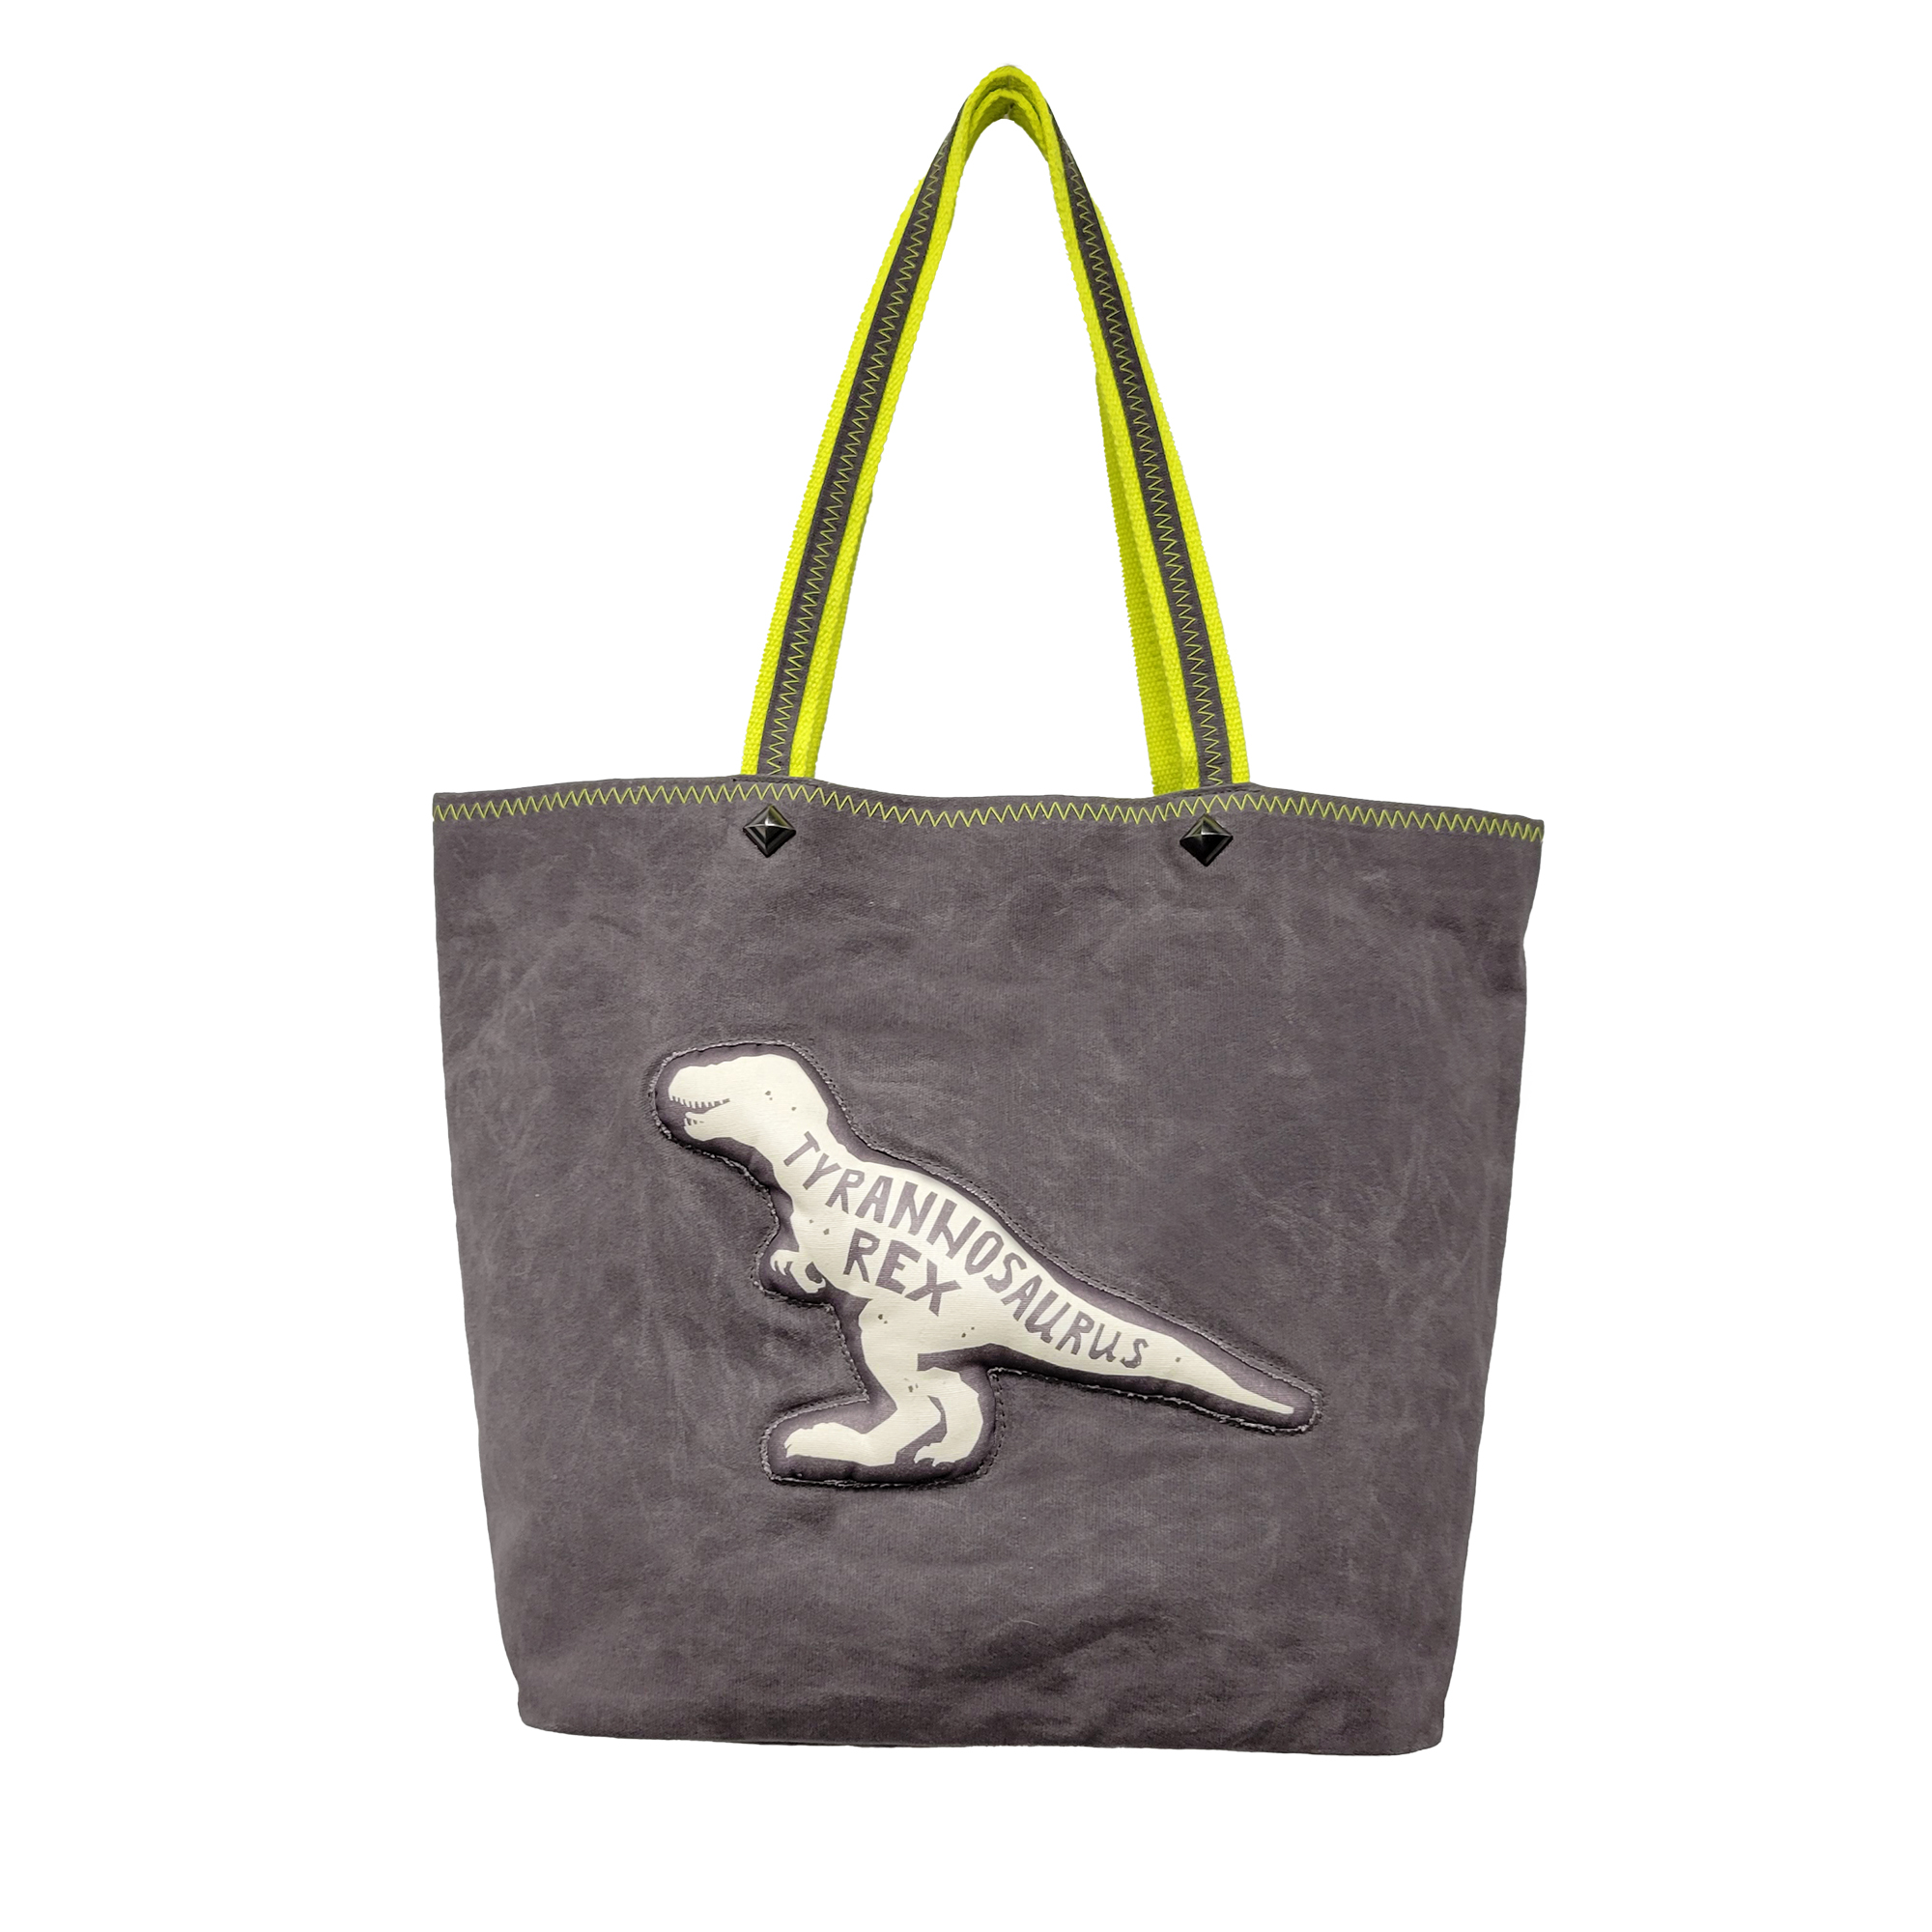 Waxed Cotton Canvas Tote Bag with Fun Pop-up Dinosaur